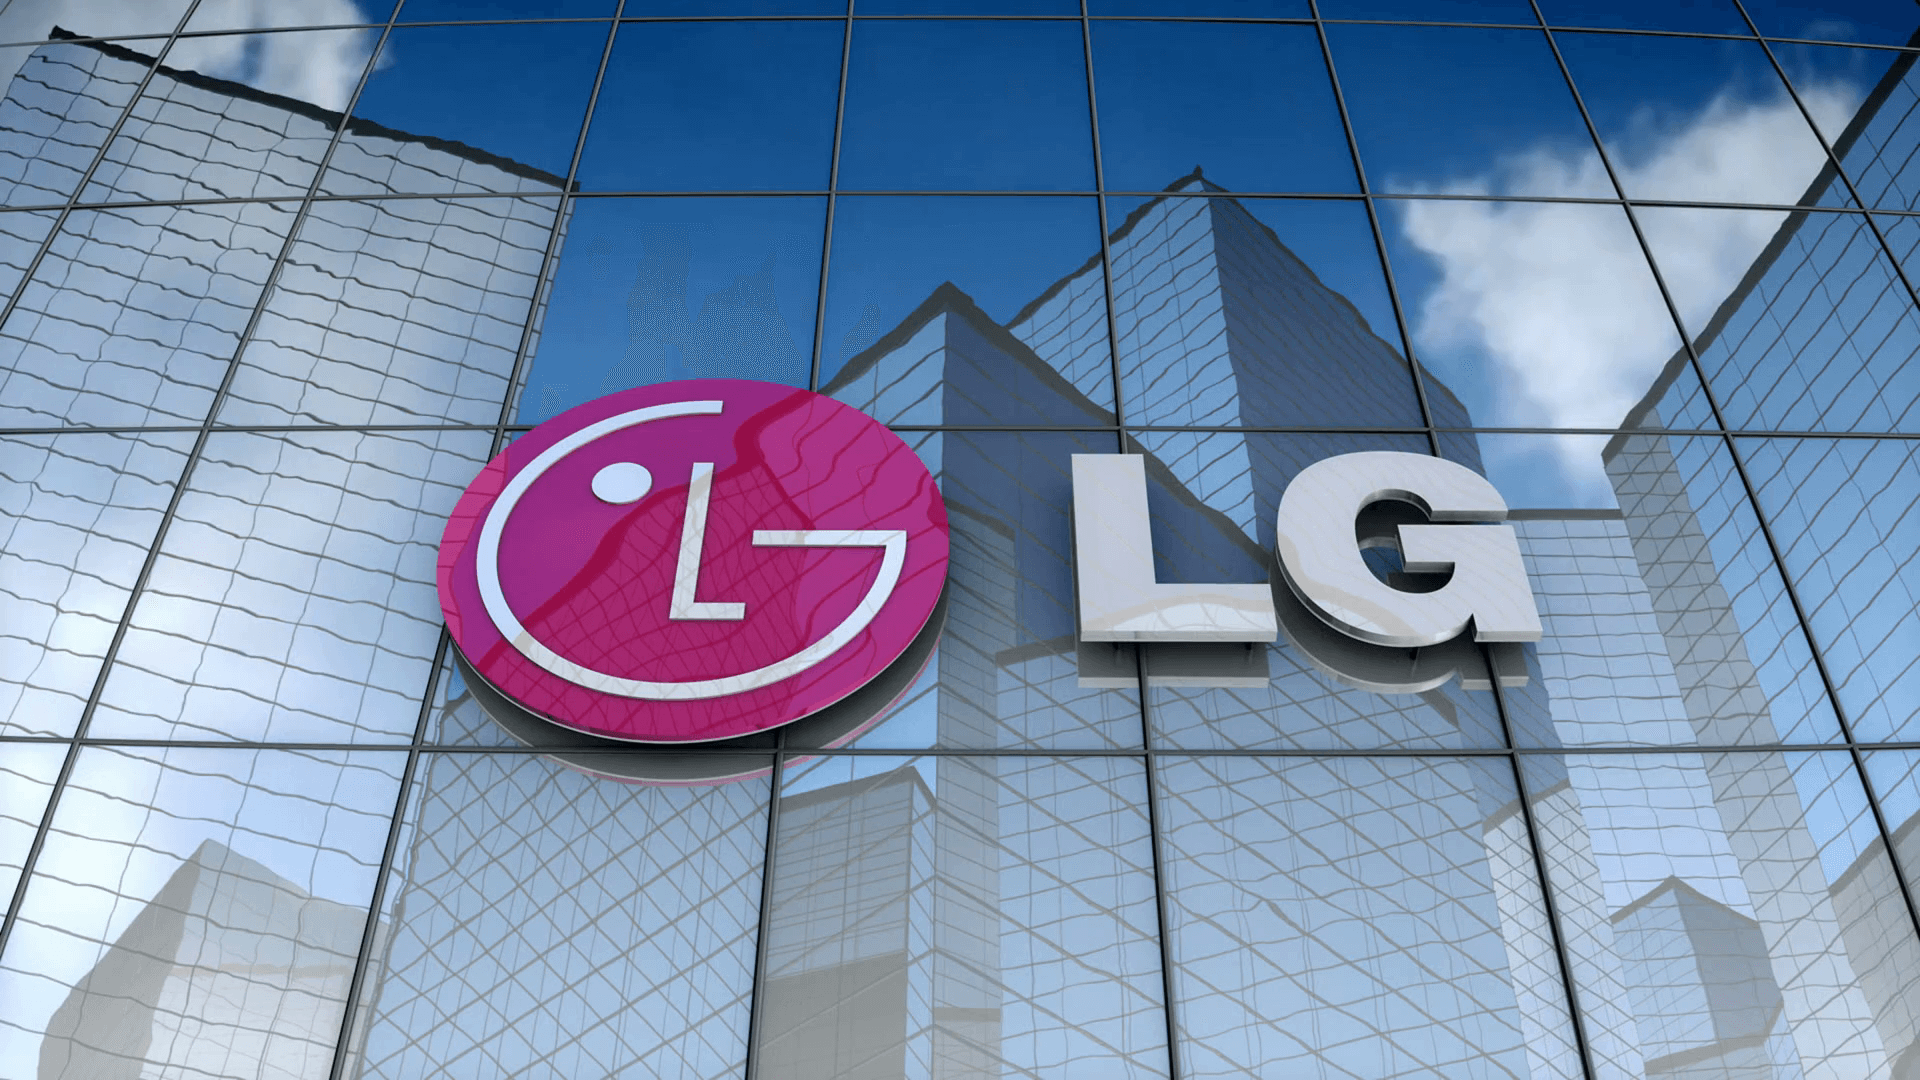 LG is scaling up its cloud-based call centers